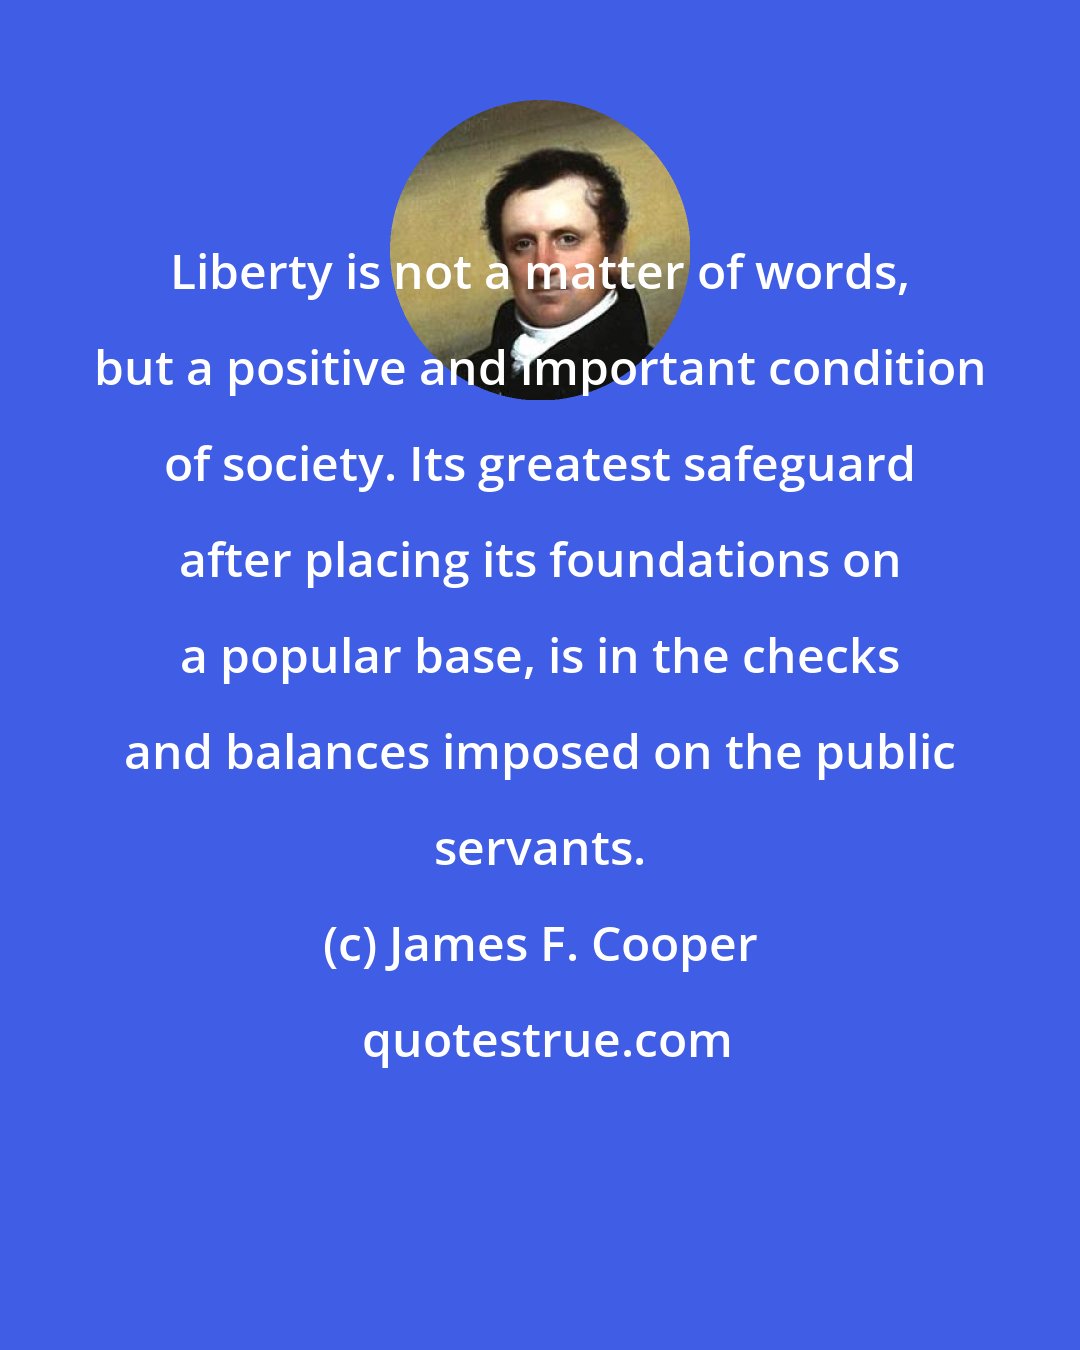 James F. Cooper: Liberty is not a matter of words, but a positive and important condition of society. Its greatest safeguard after placing its foundations on a popular base, is in the checks and balances imposed on the public servants.